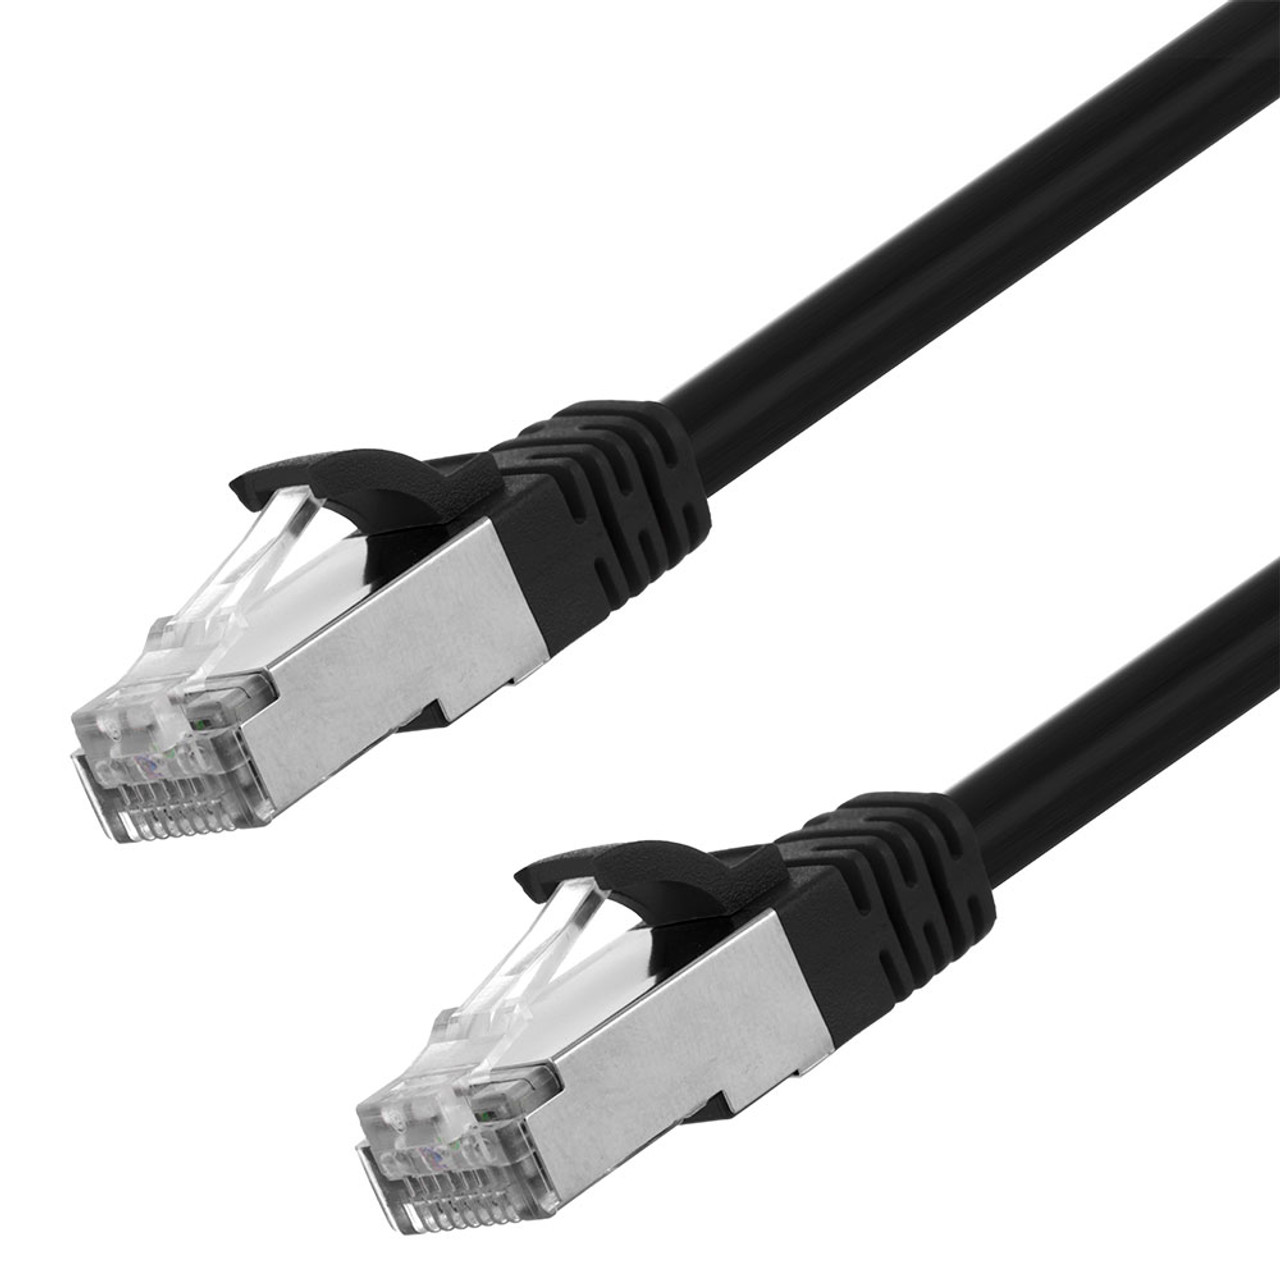 Ethernet Patch Cable CAT6A, S/FTP, 26AWG, 7 Ft,  5 pack, Black